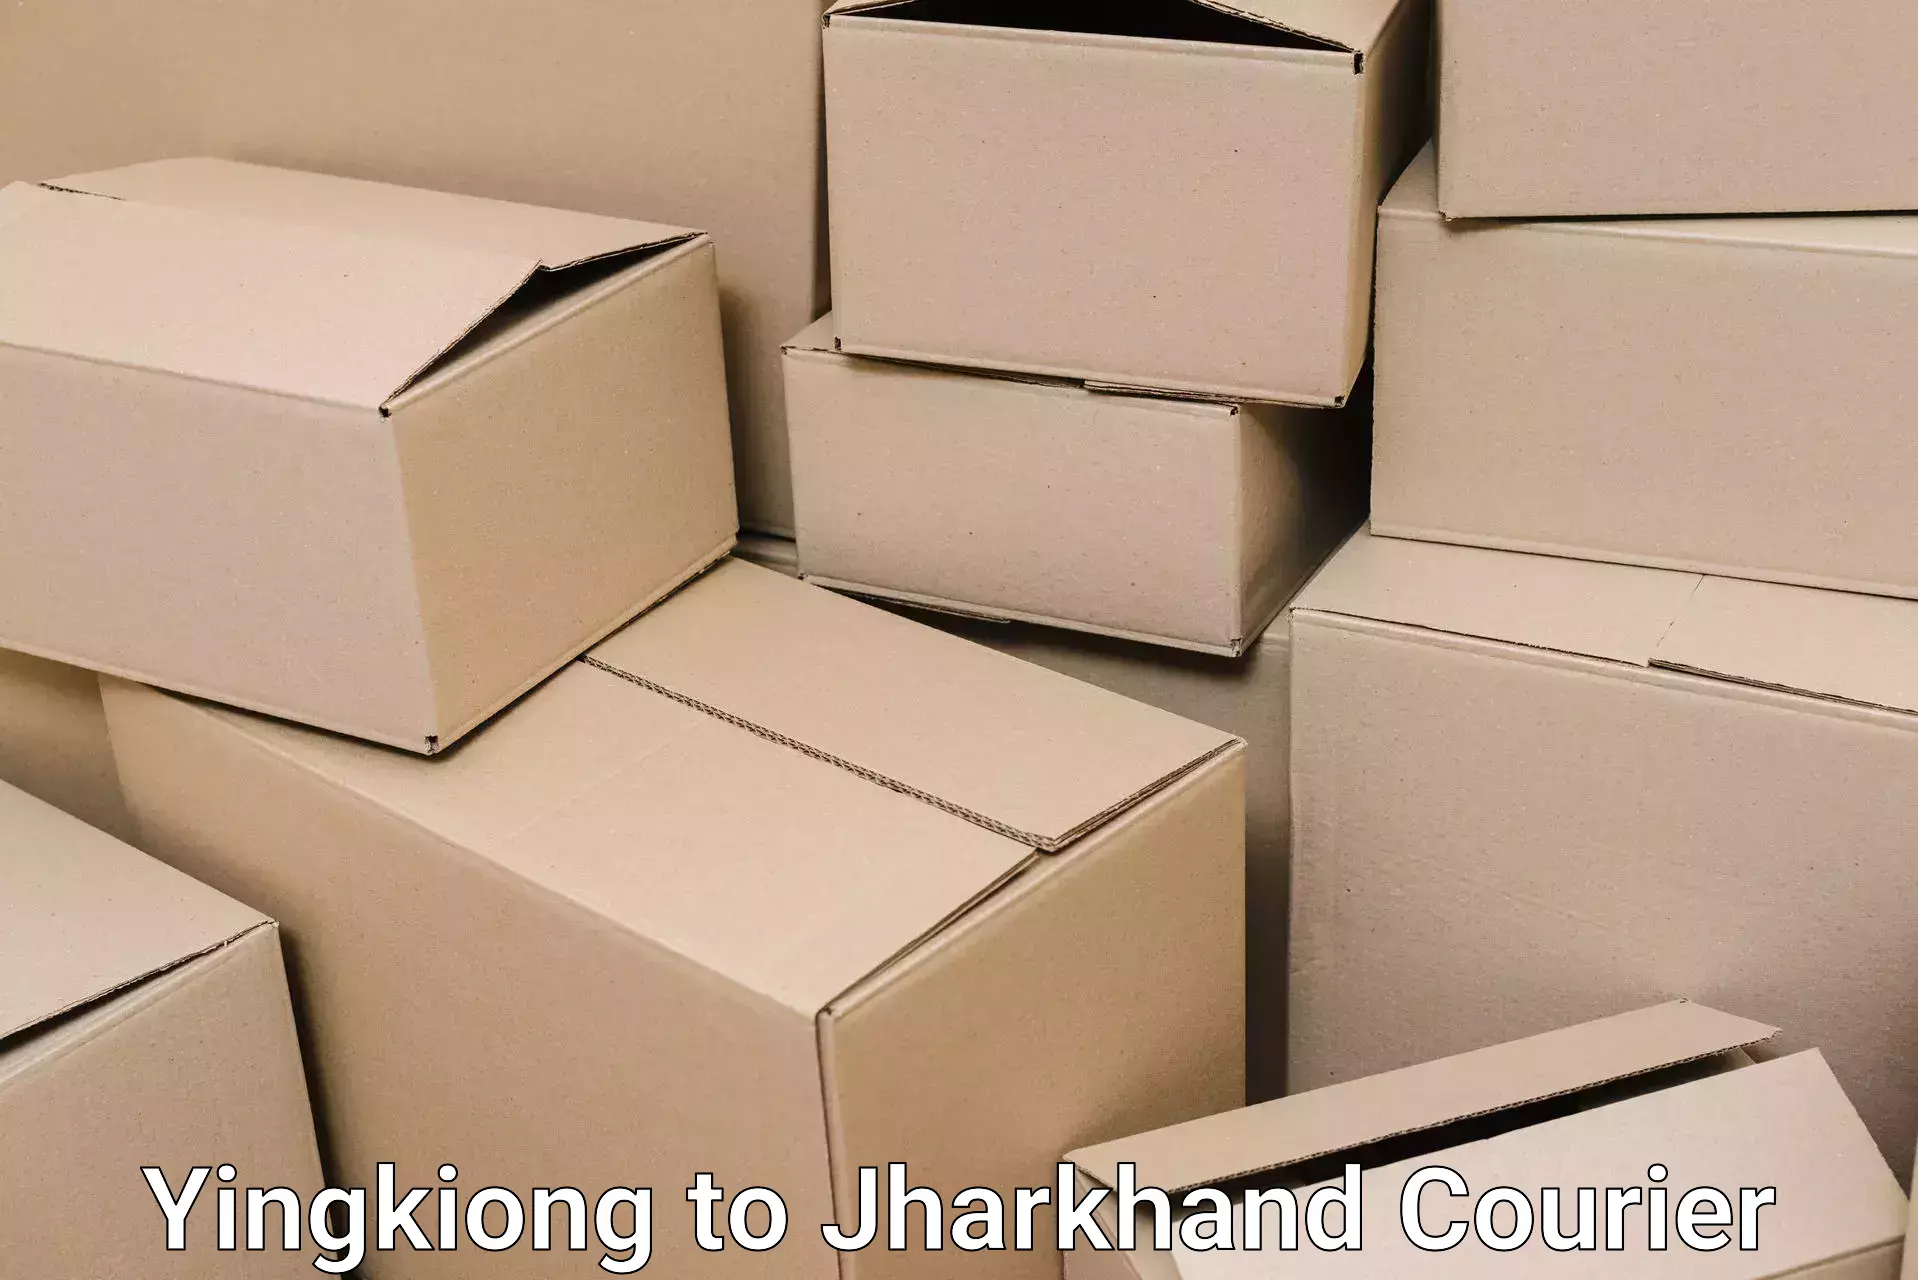 Trusted relocation experts Yingkiong to Hariharganj